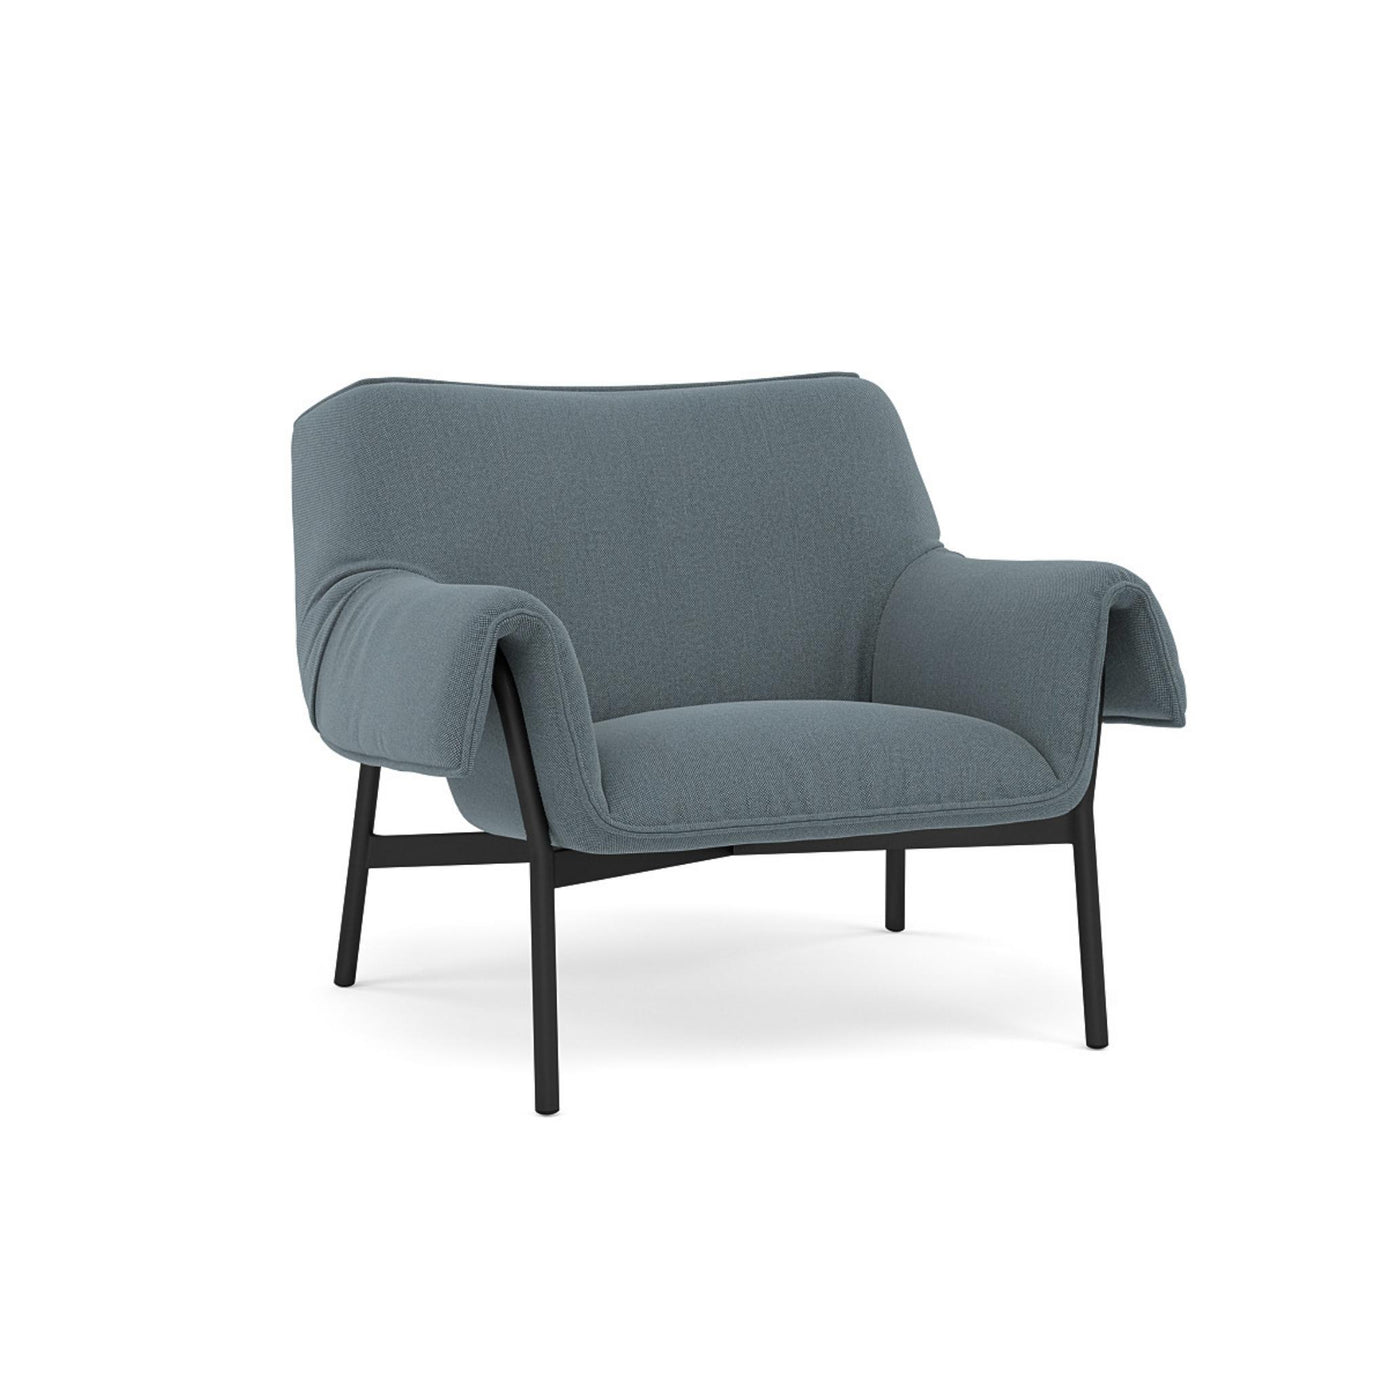 Muuto Wrap Lounge Chair. Made to order from someday designs. #colour_re-wool-768